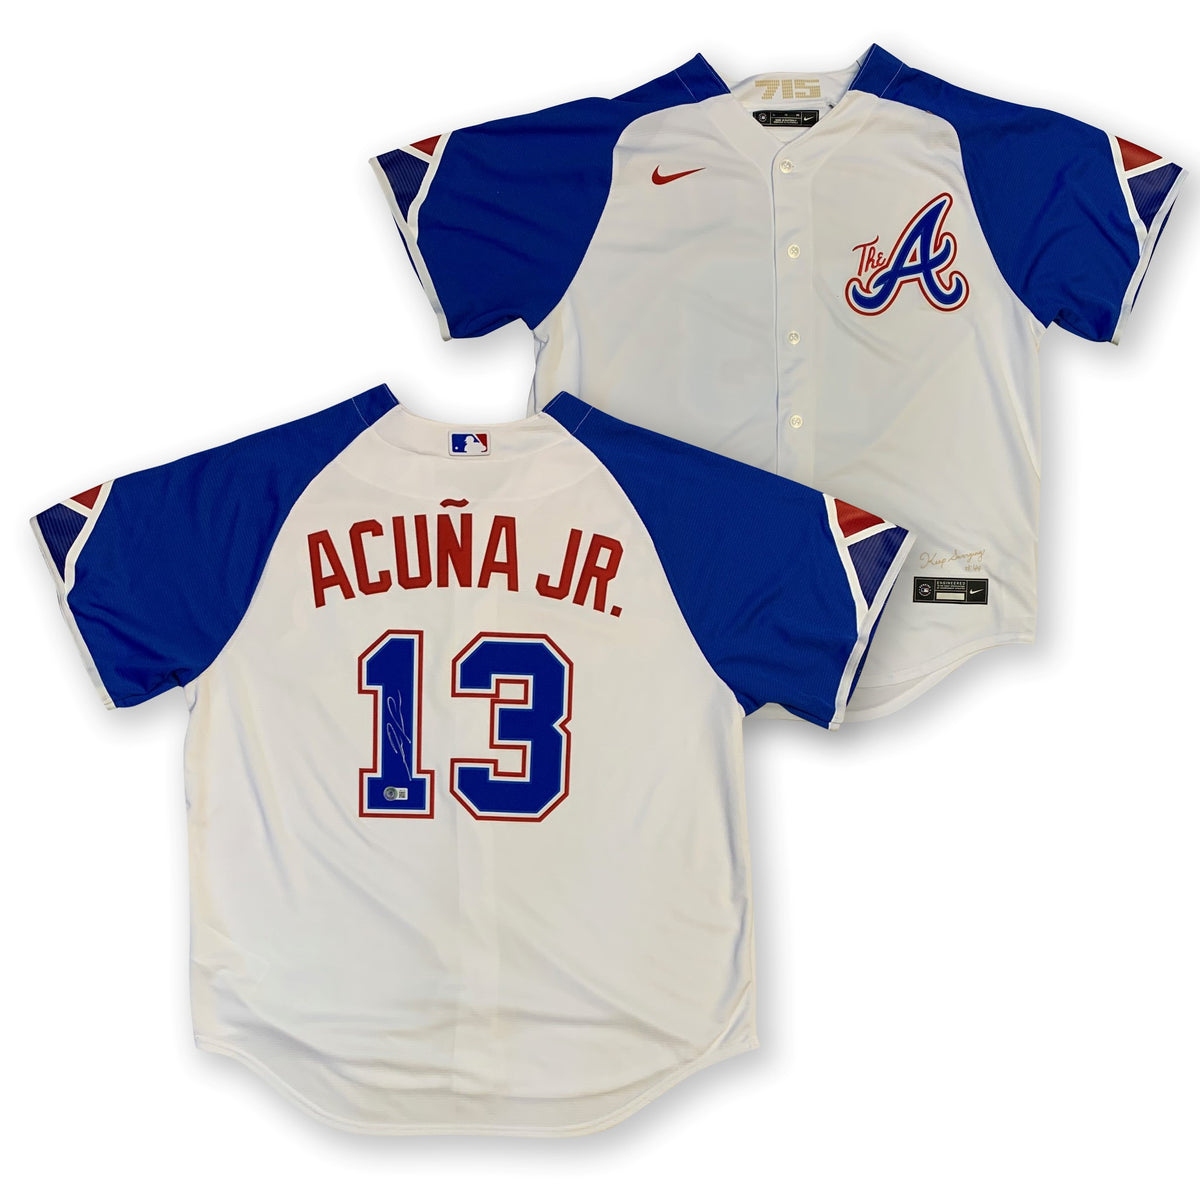 Autographed Signed Baseball Jerseys - Authenticated + FREE Shipping